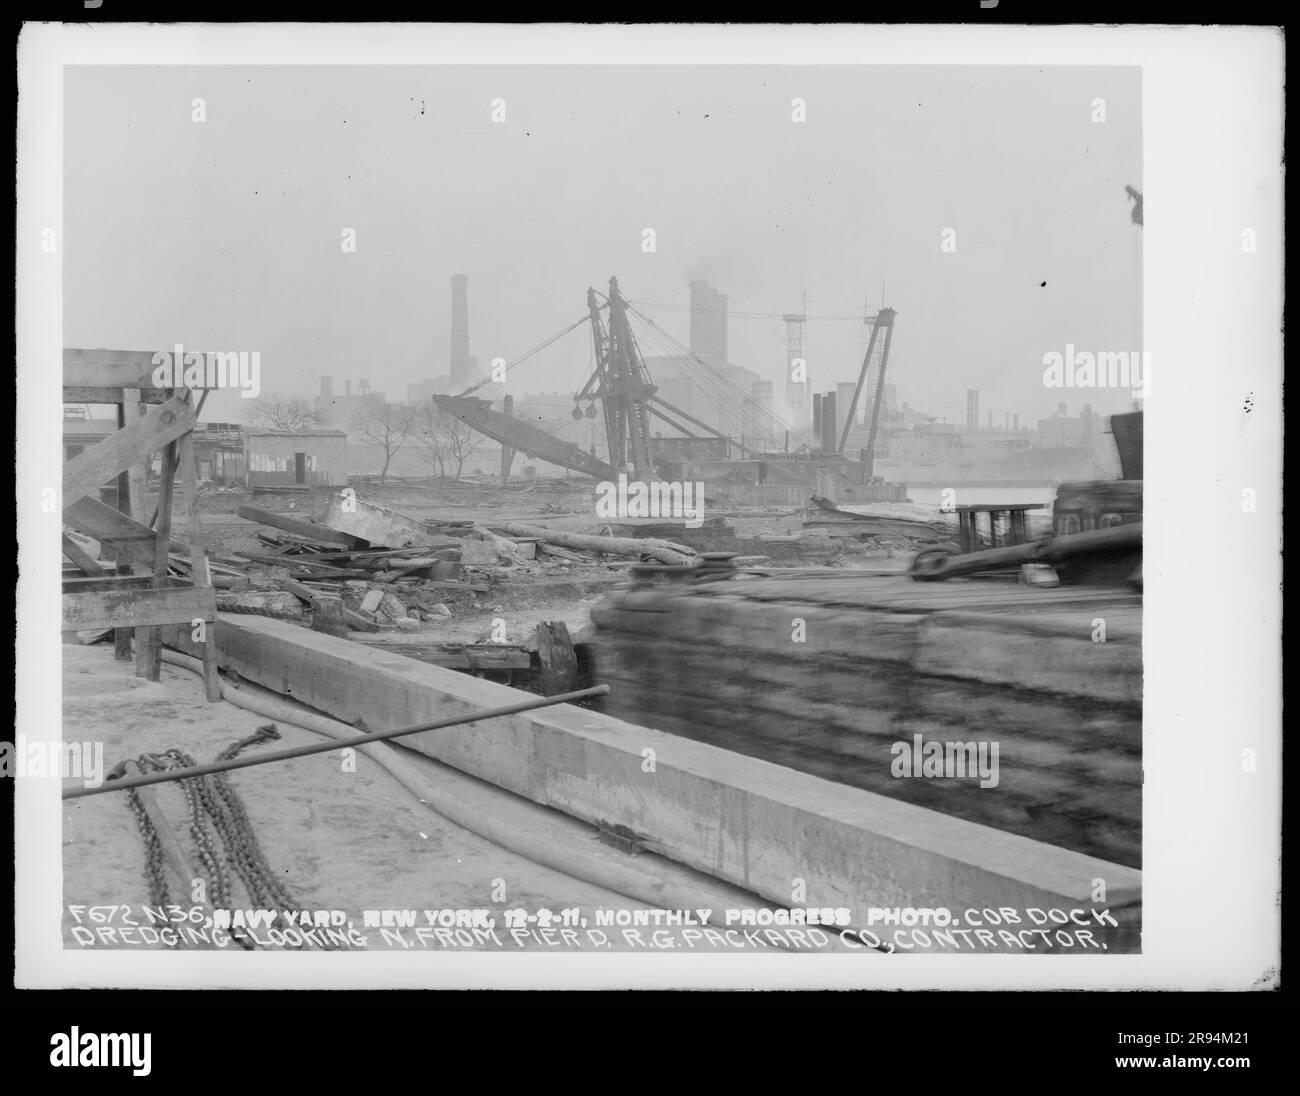 Monthly Progress Photo, Cob Dock Dredging, Looking North from Pier, R. G. Packard Company, Contractor. Glass Plate Negatives of the Construction and Repair of Buildings, Facilities, and Vessels at the New York Navy Yard. Stock Photo